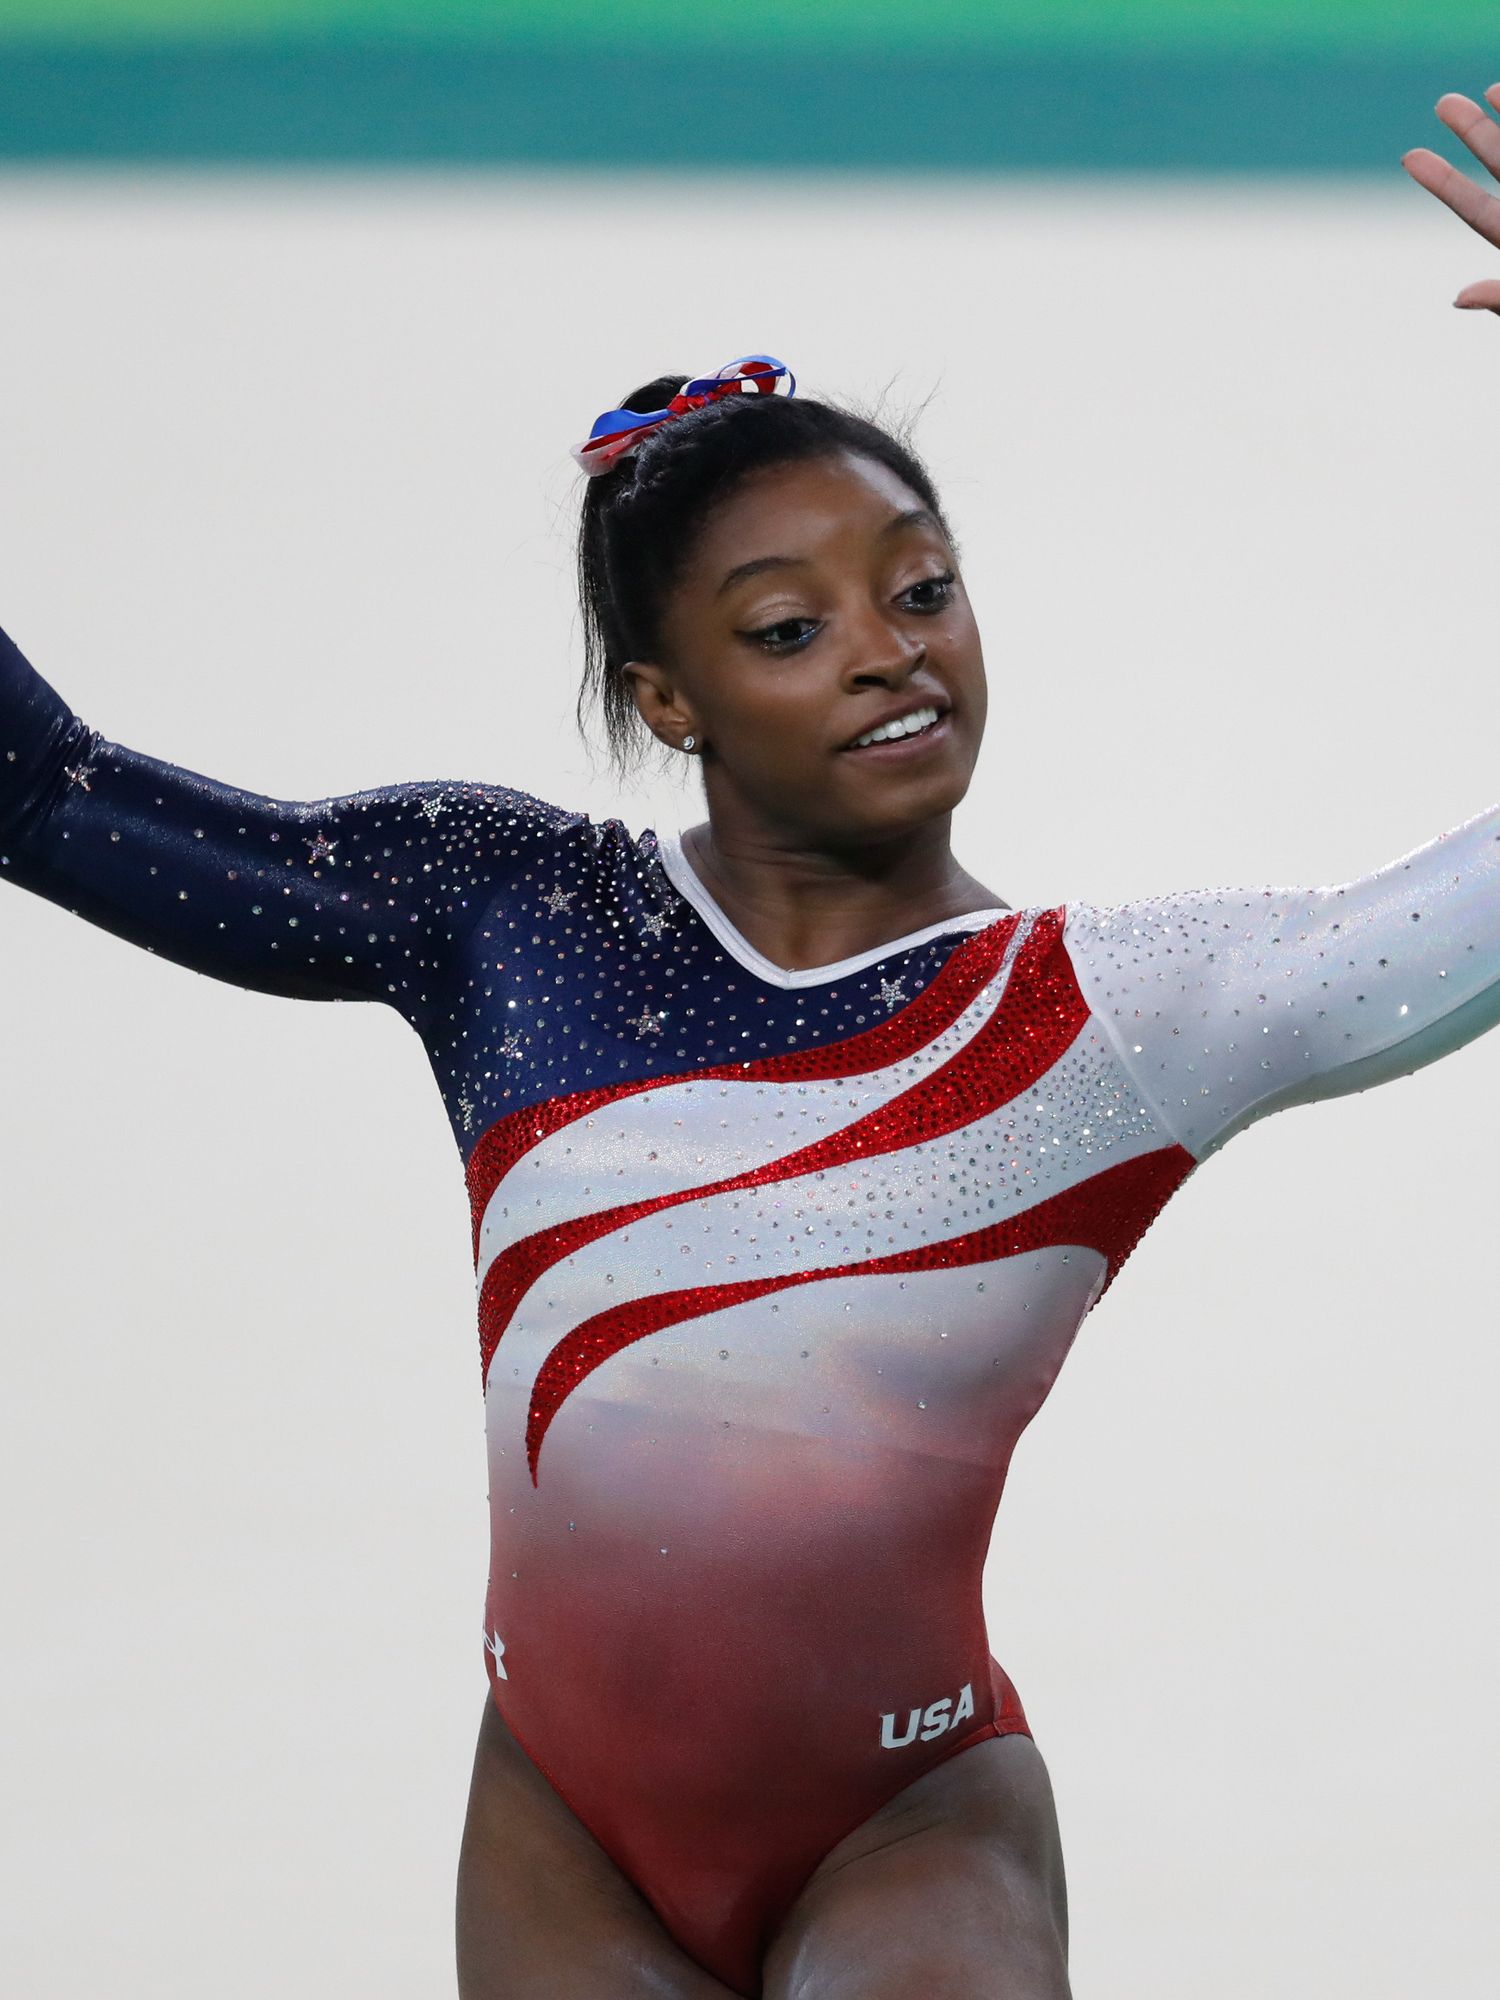 Simone Biles is so good at gymnastics, her signature move is now named